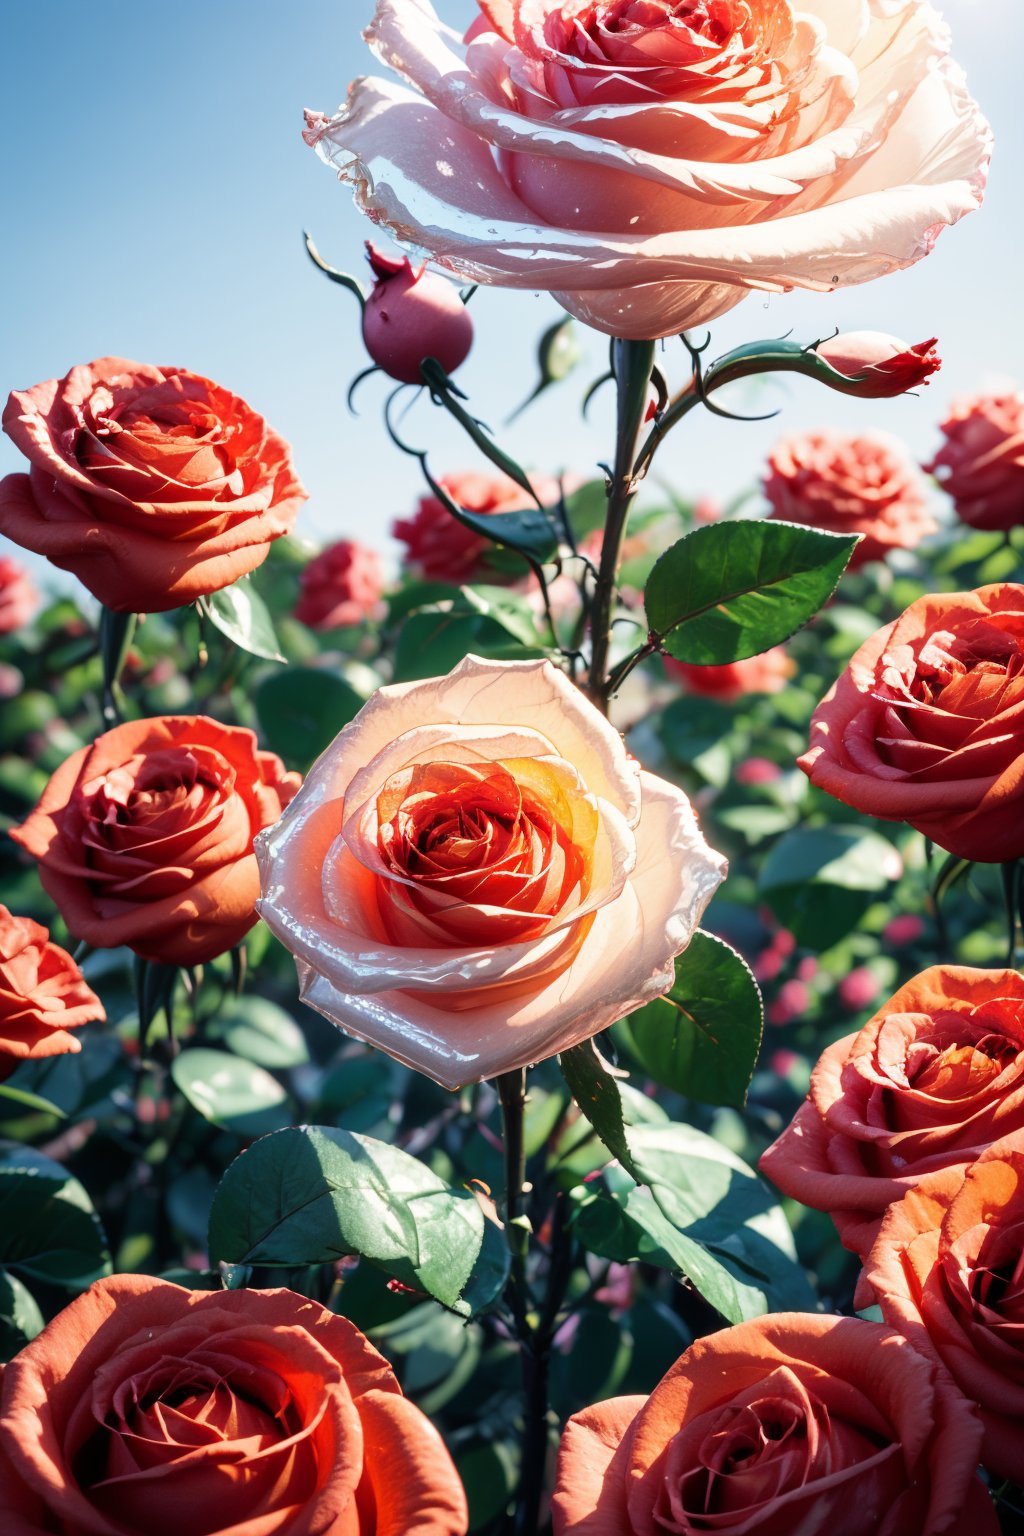 photorealistic, realistic, no humans, flower, blurry, orange flower, still life, depth of field, outdoors, blurry background, day, sky, red flower, blue sky, cloud, leaf, scenery, rose, (transparent rose:1.4)